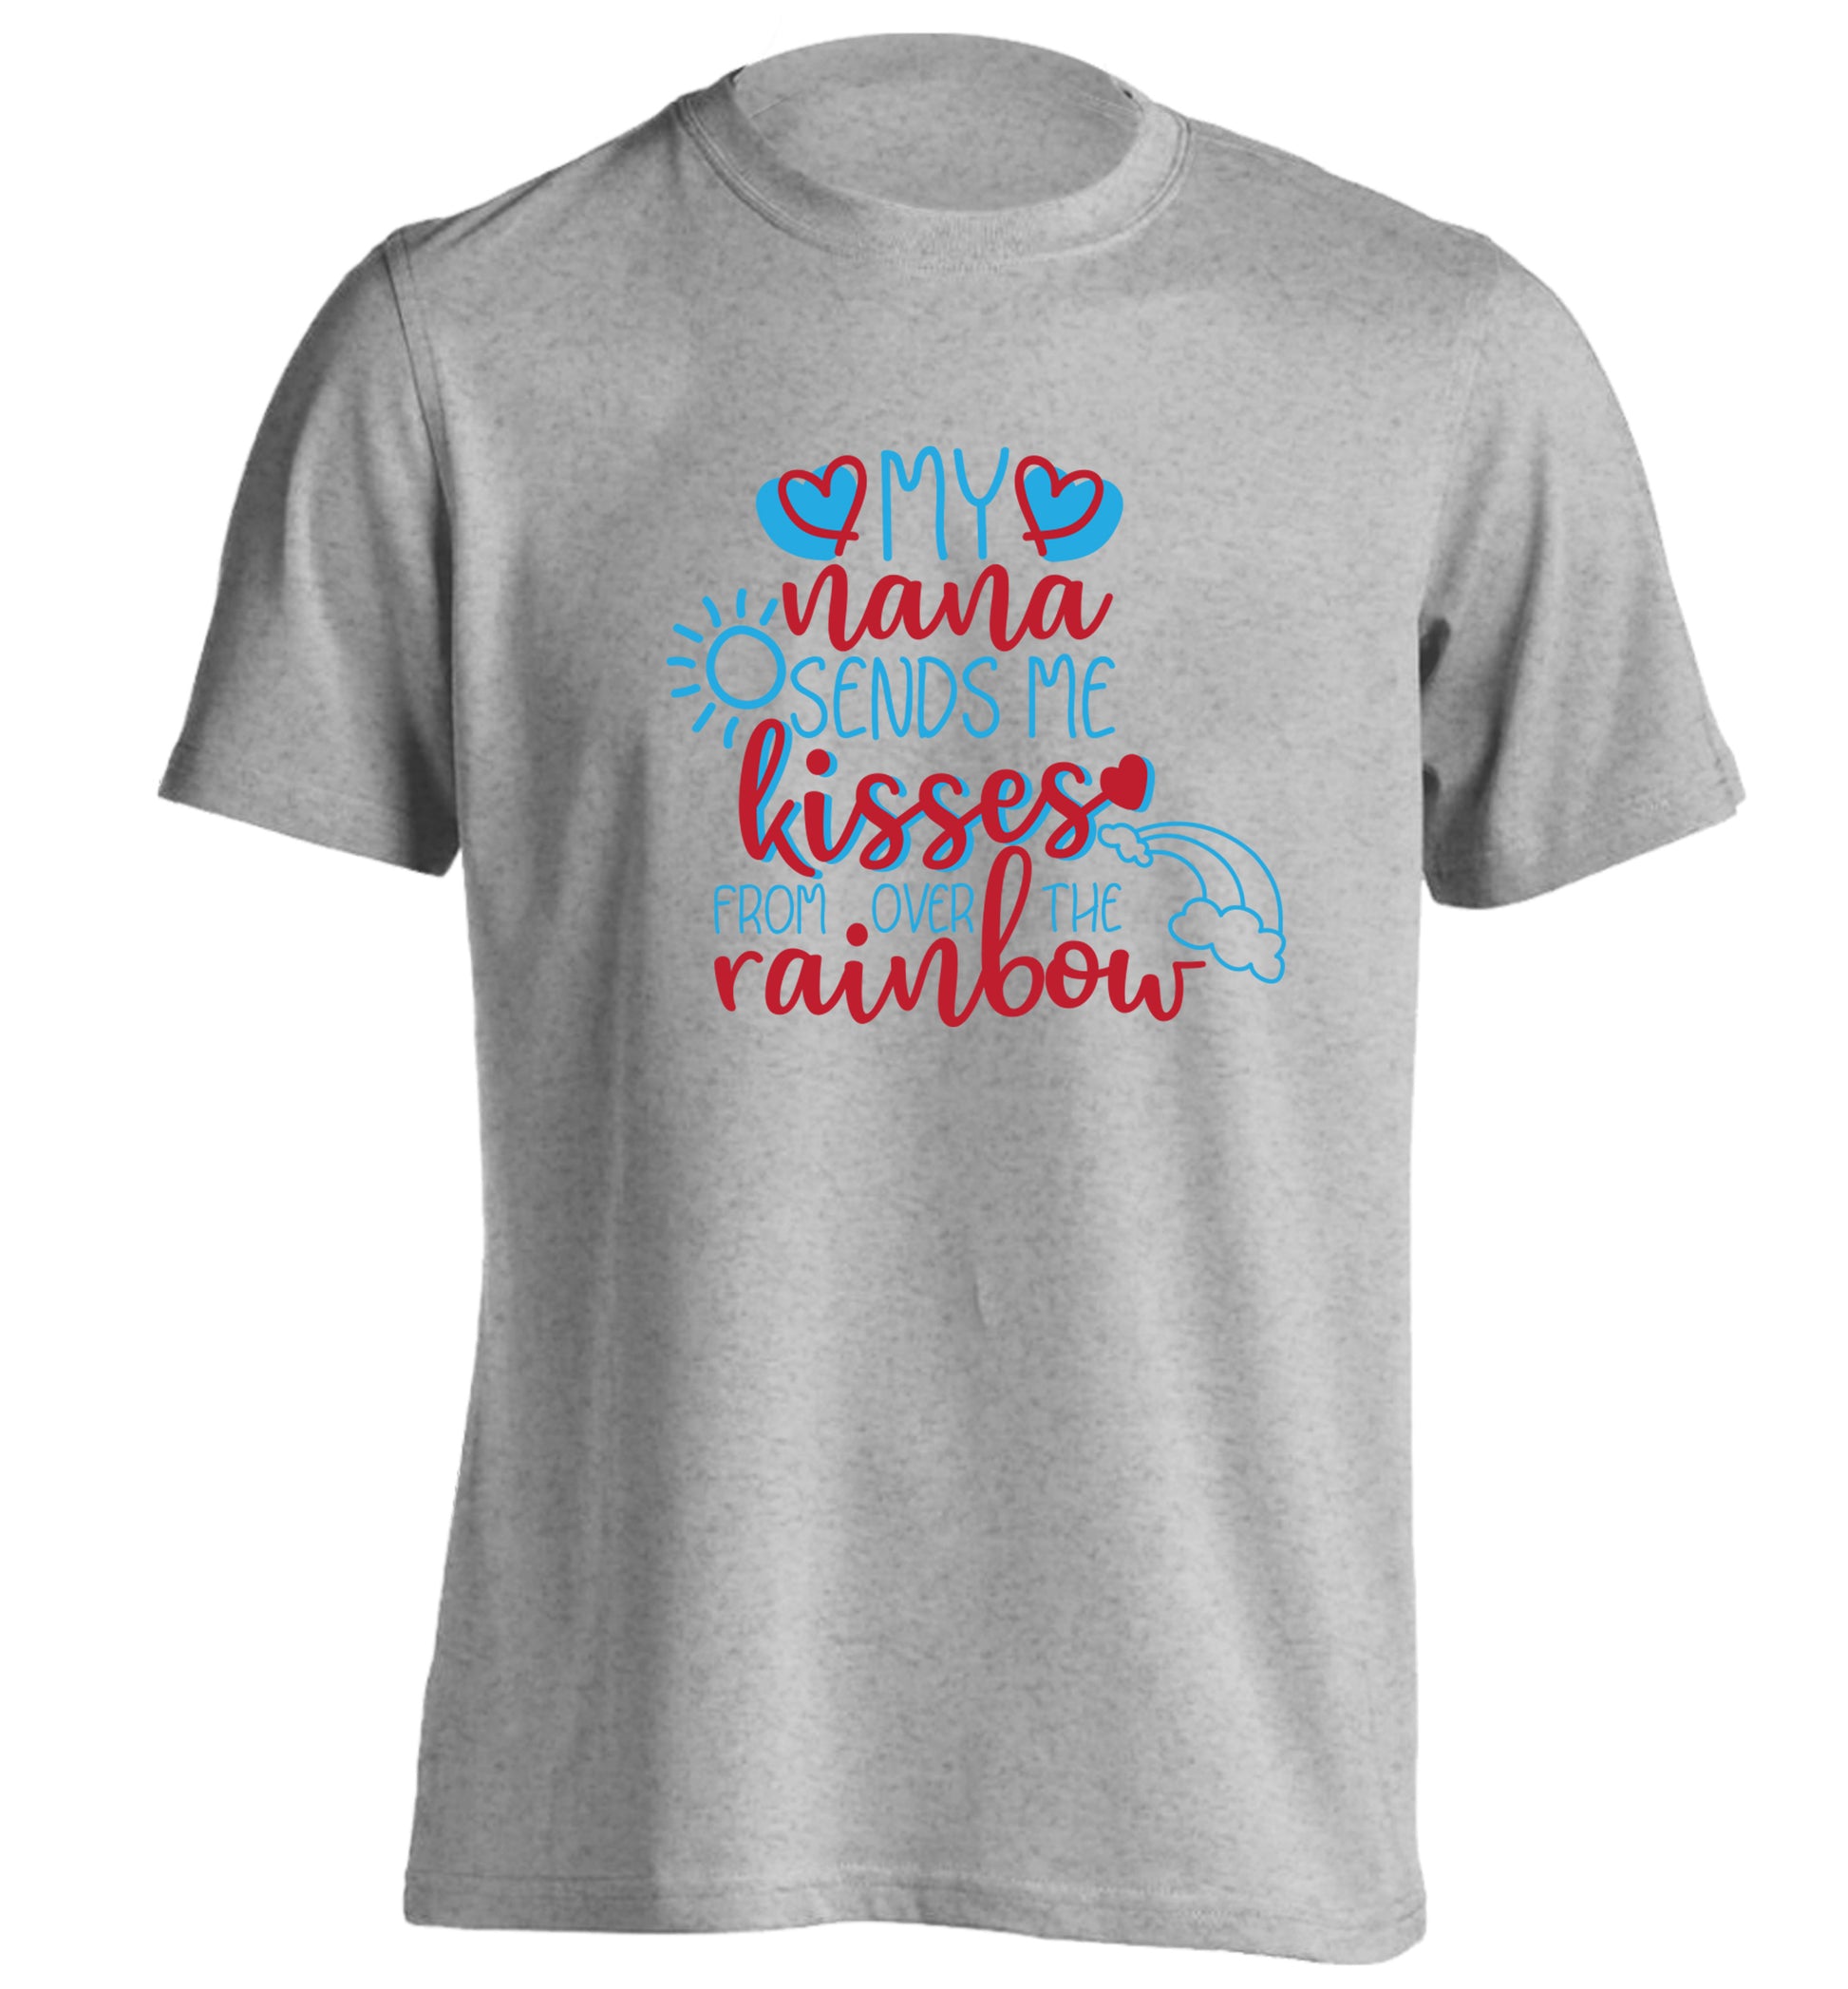 My nana sends me kisses from over the rainbow adults unisex grey Tshirt 2XL